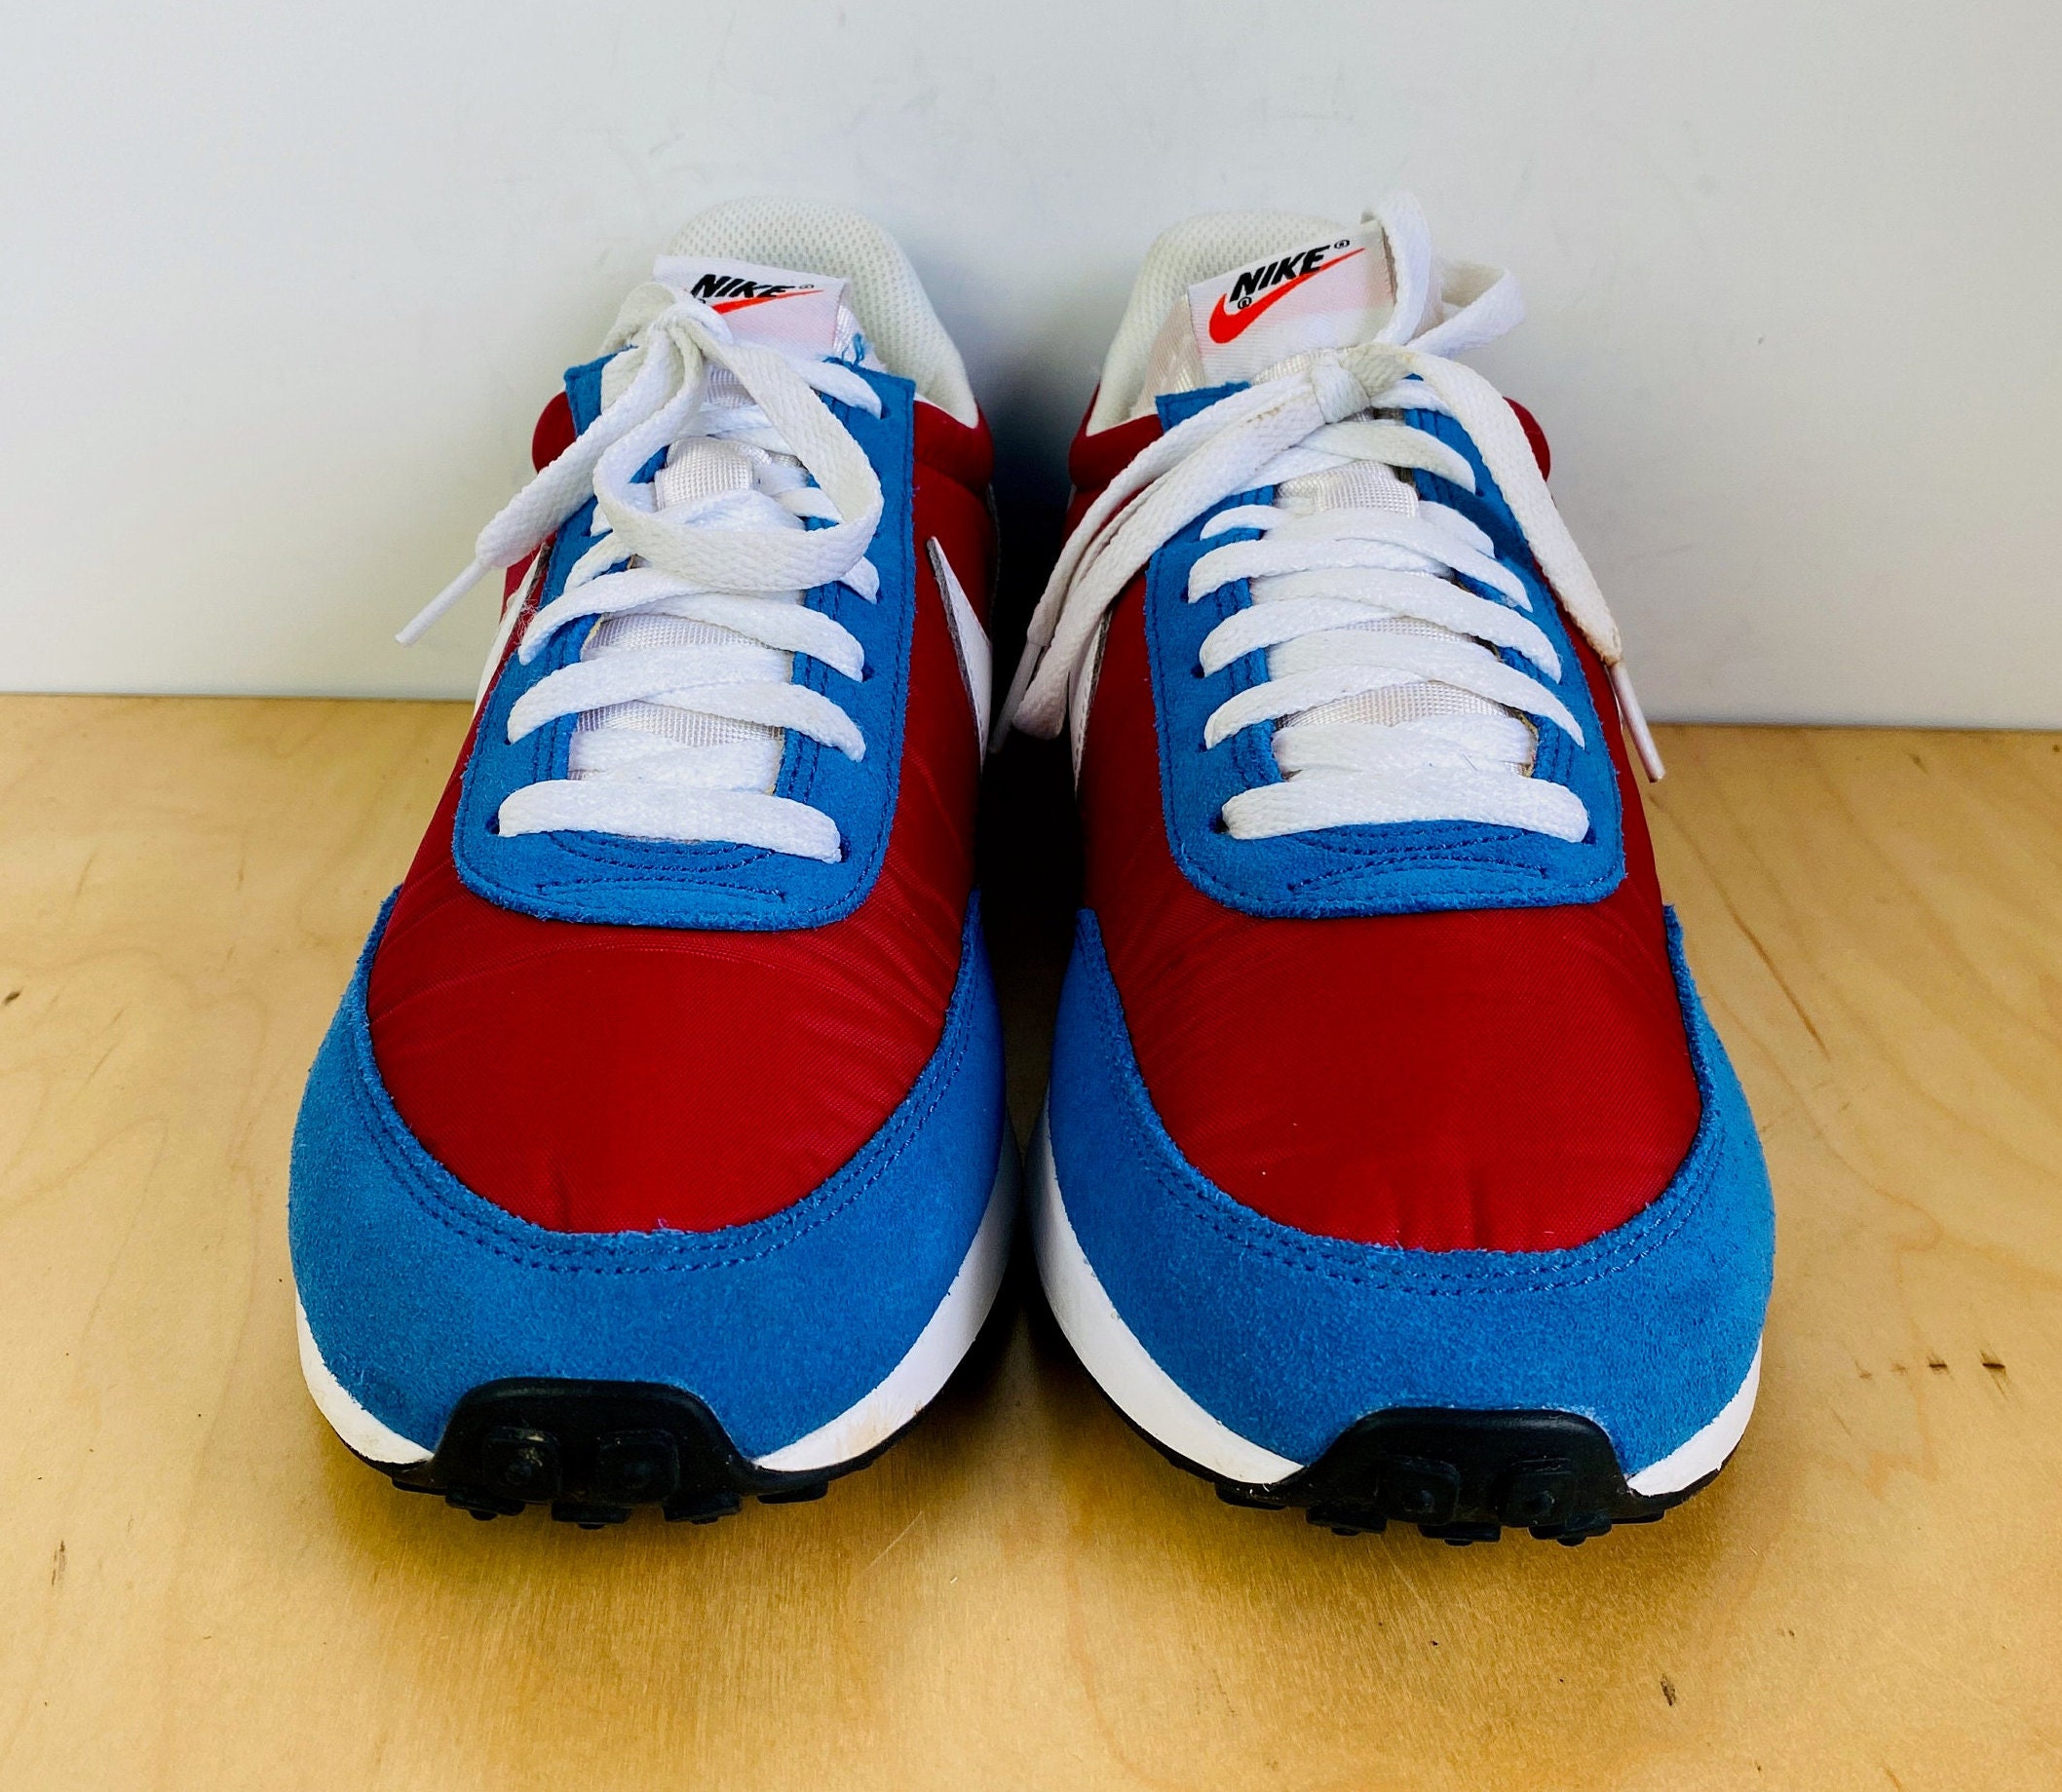 Vintage Nike Tailwind 79 Battle Blue Gym Red Tennis Shoes 8. - Etsy Finland